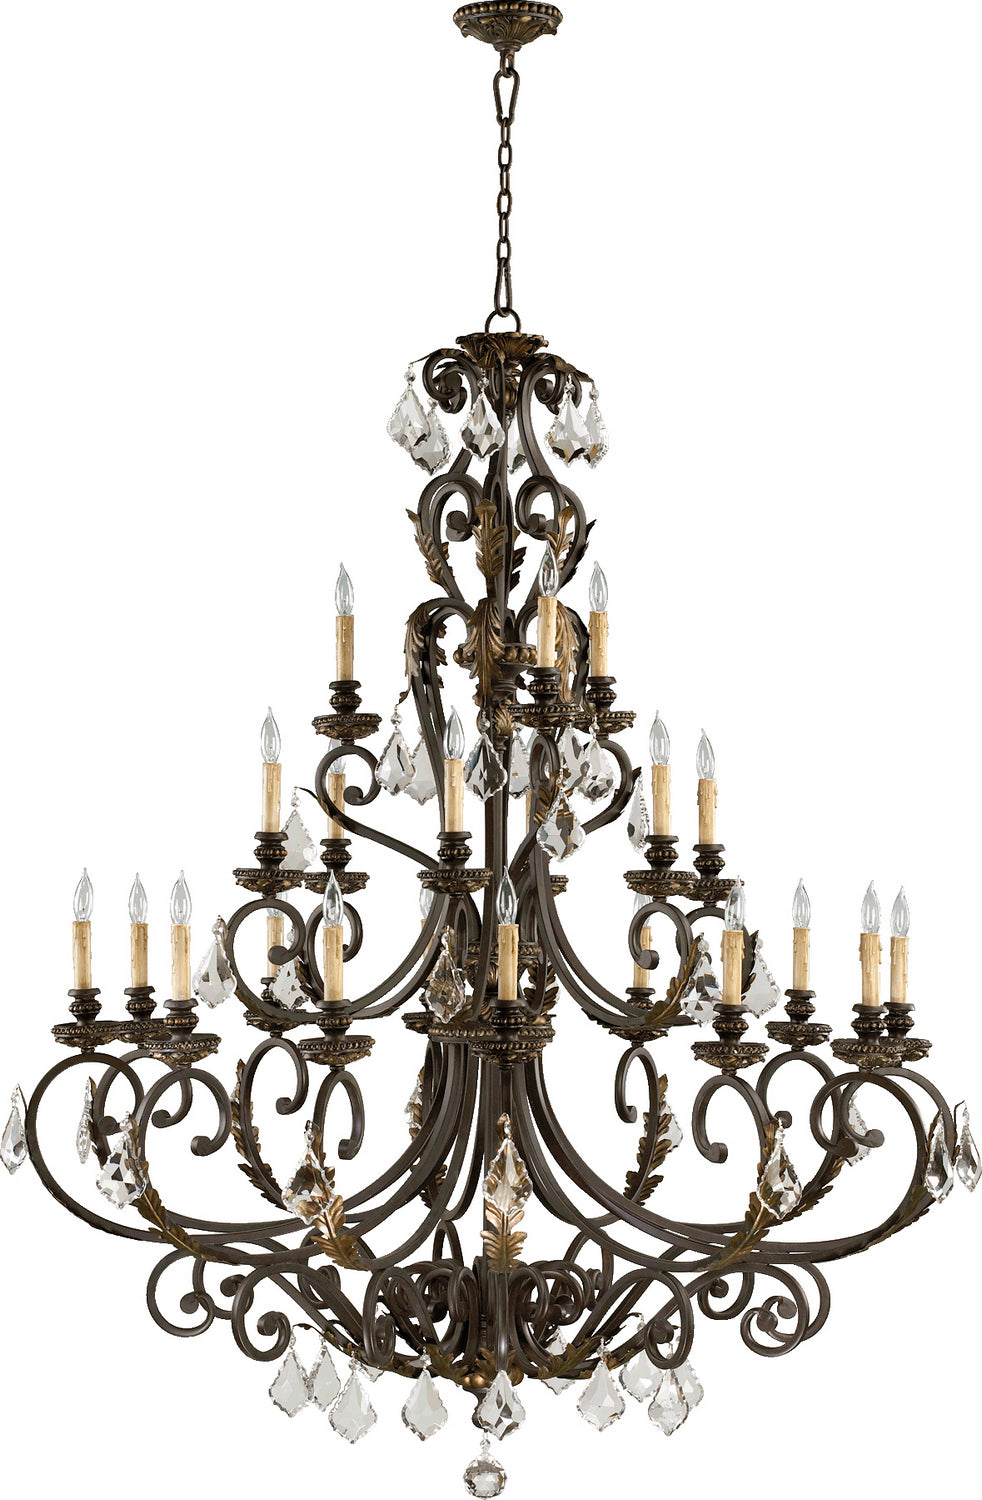 Quorum - 6157-21-44 - 21 Light Chandelier - Rio Salado - Toasted Sienna With Mystic Silver